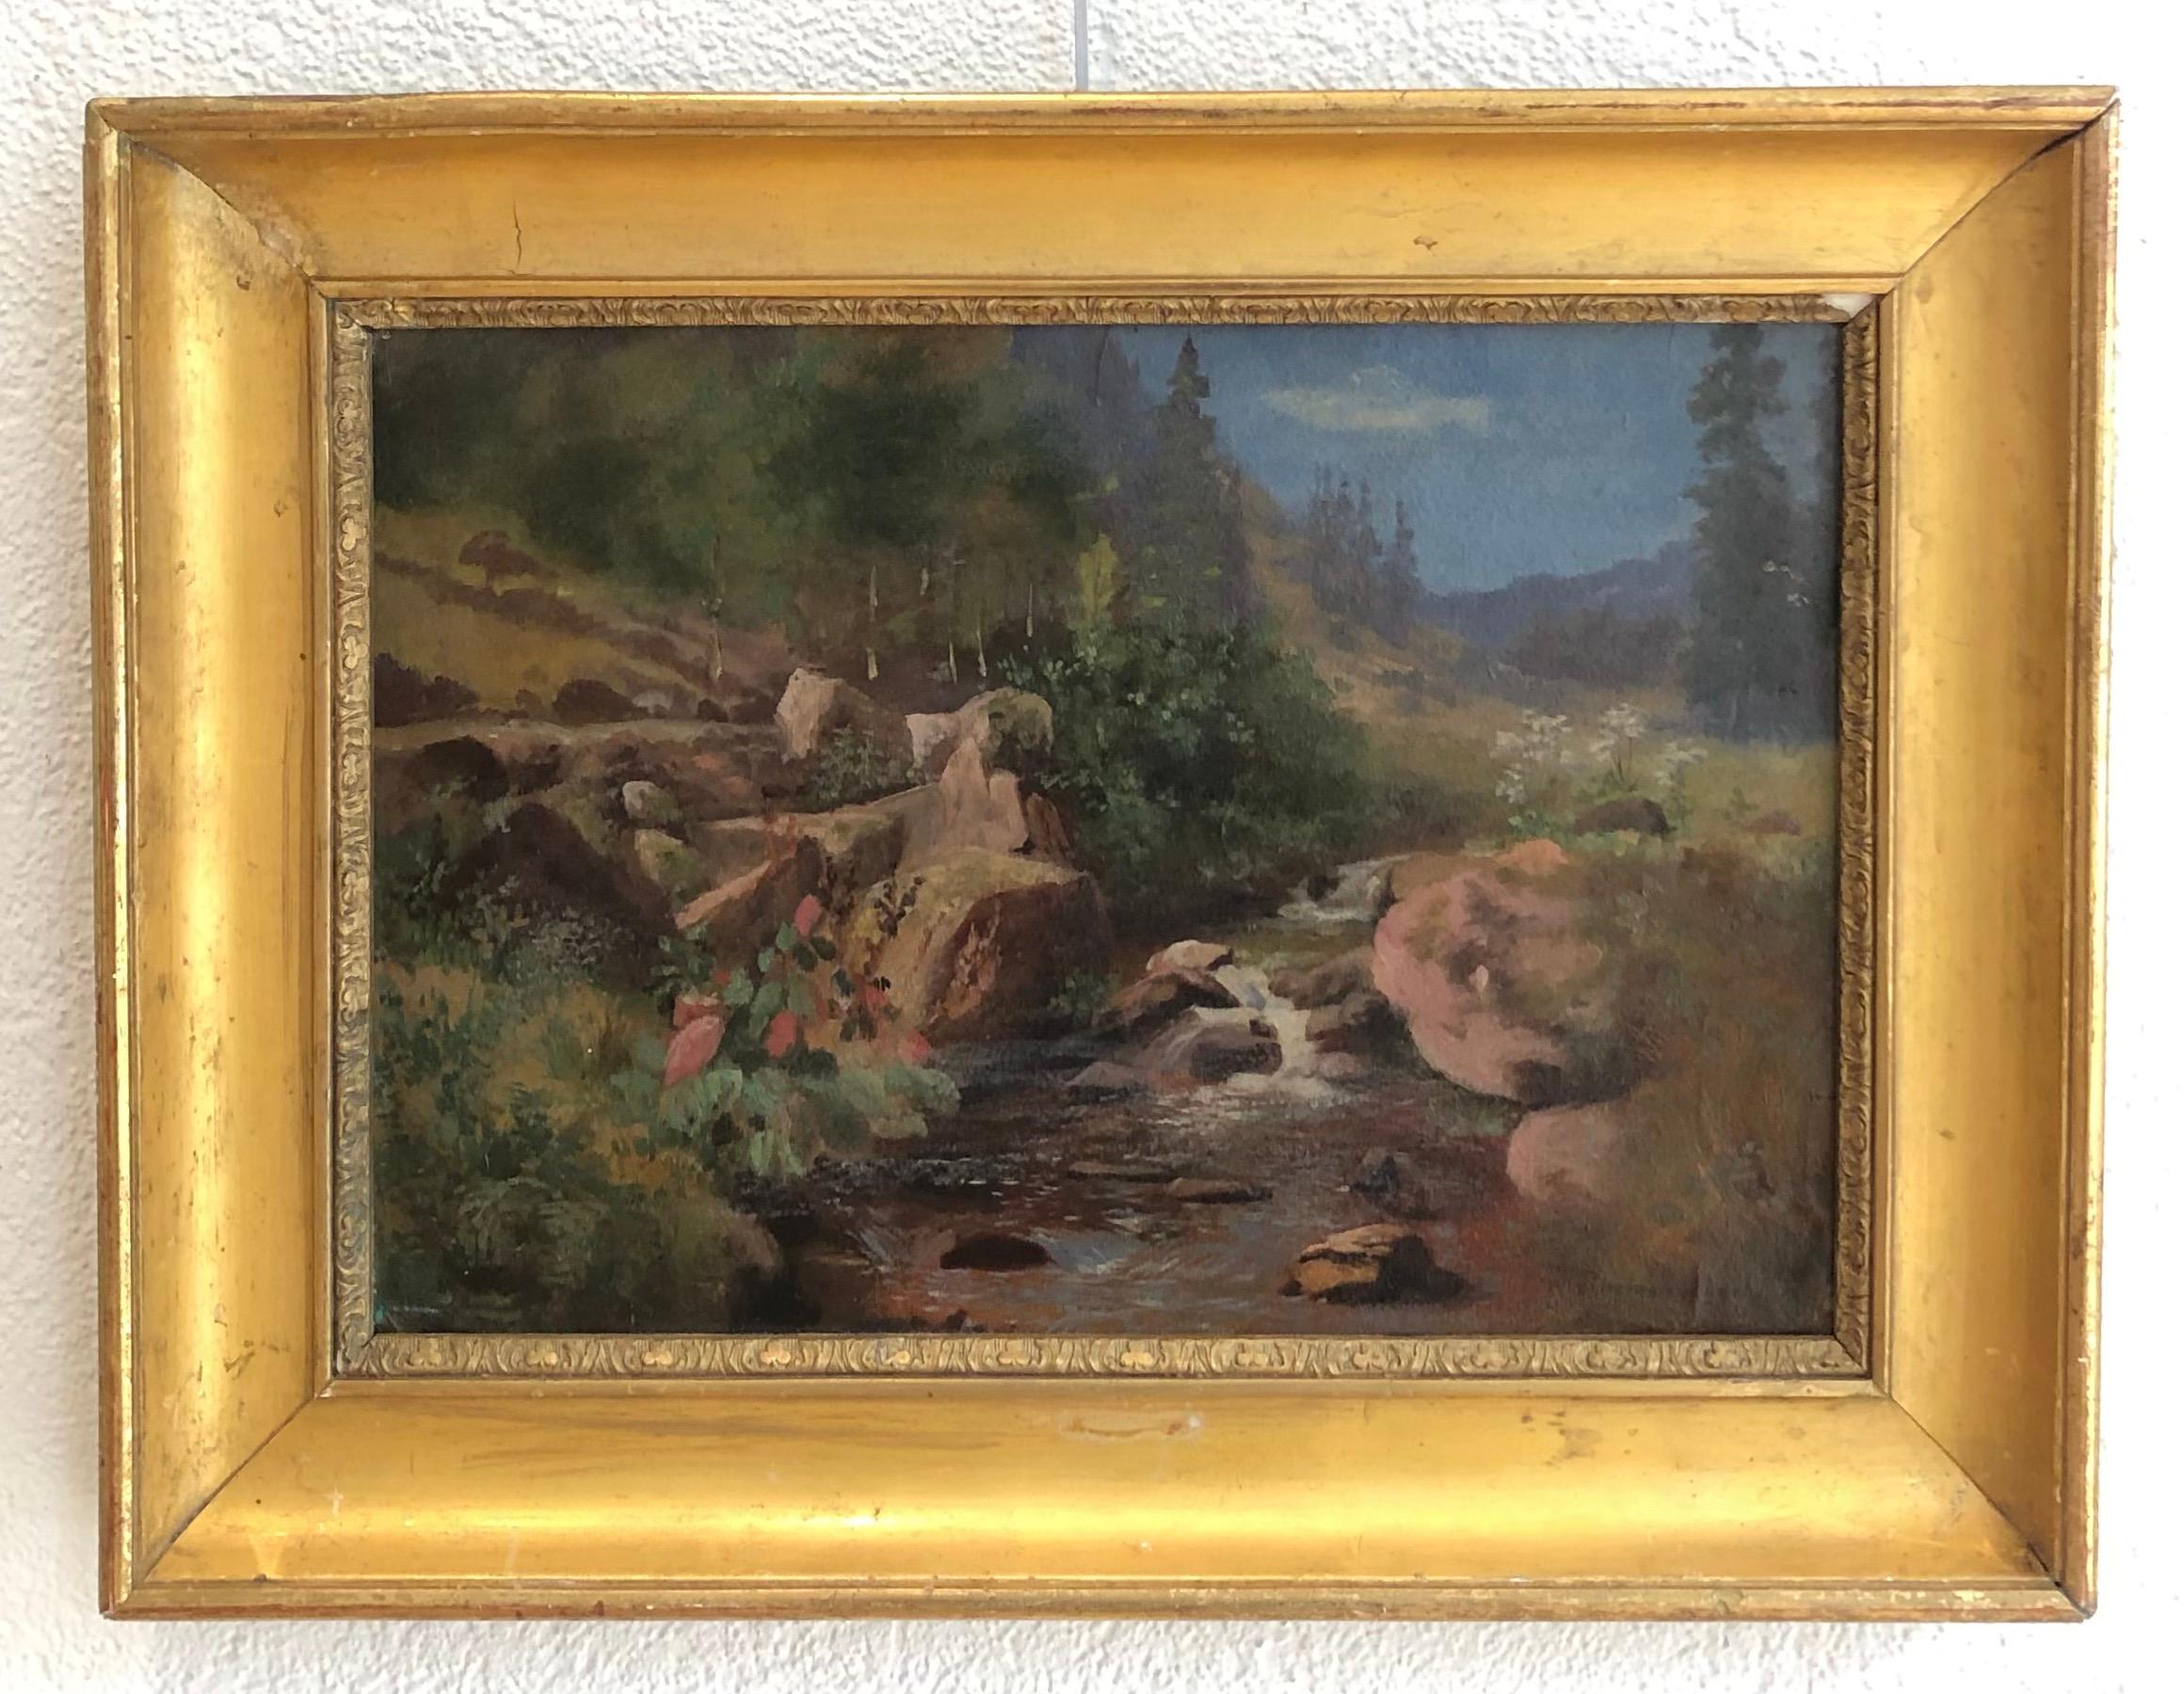 Mountain landscape by the stream - Painting by Louis Rheiner